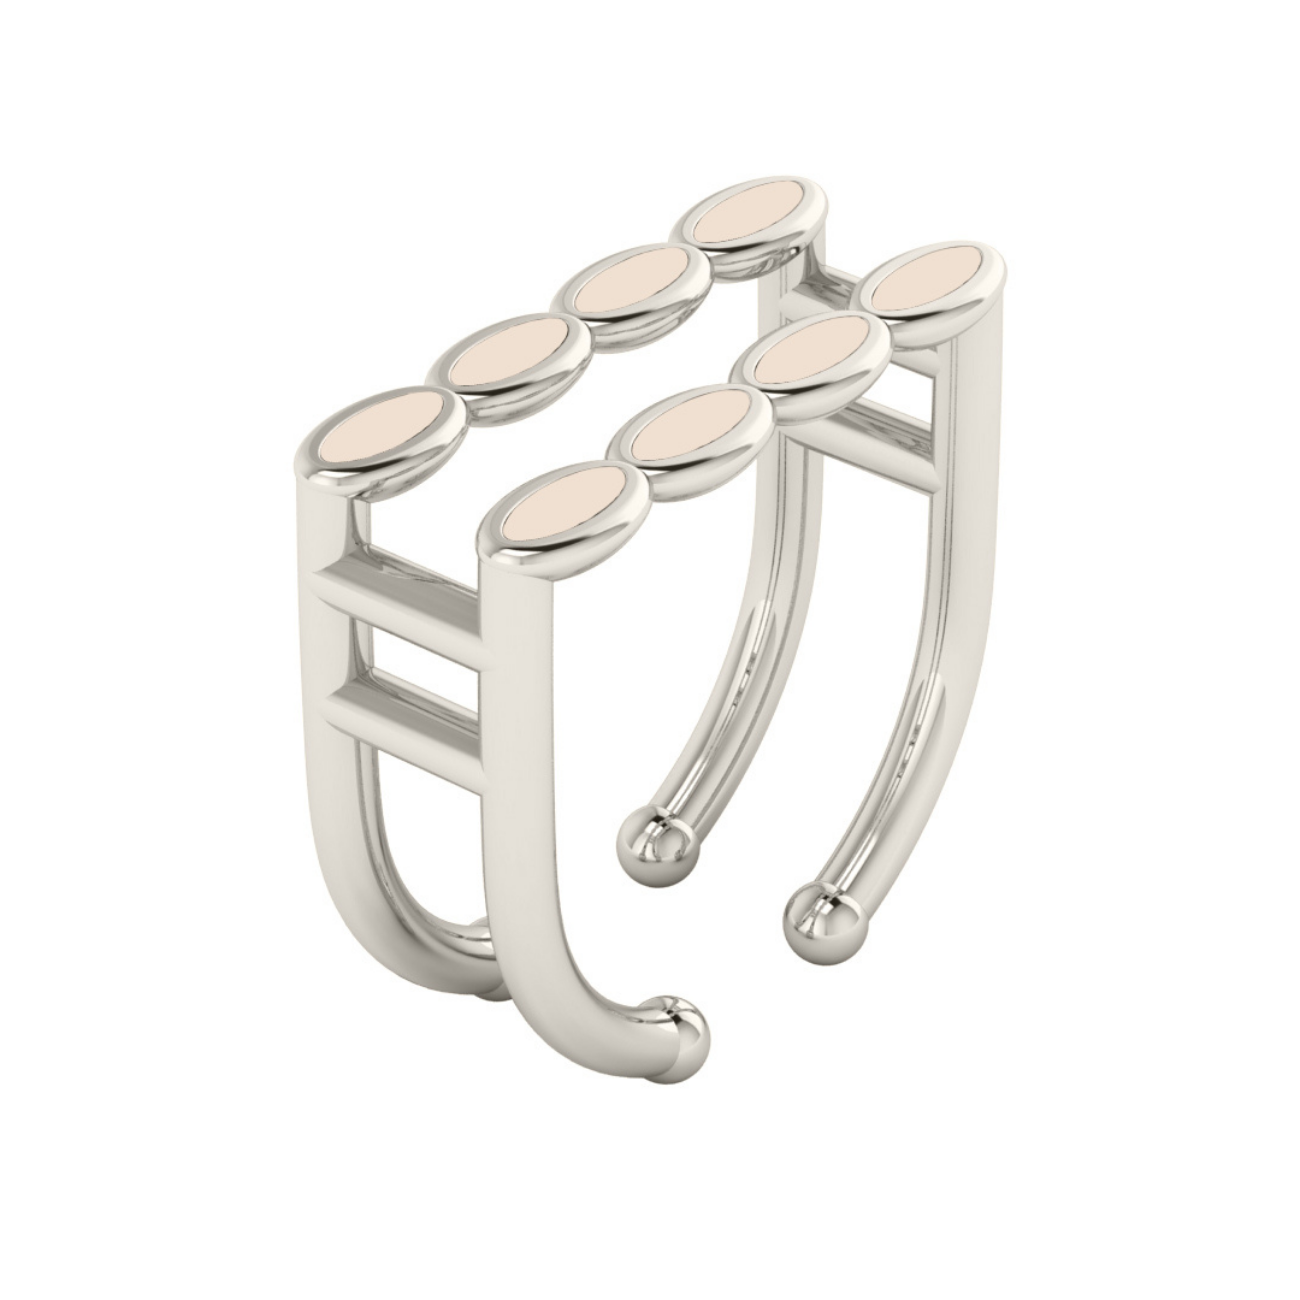 Amalei silver ring